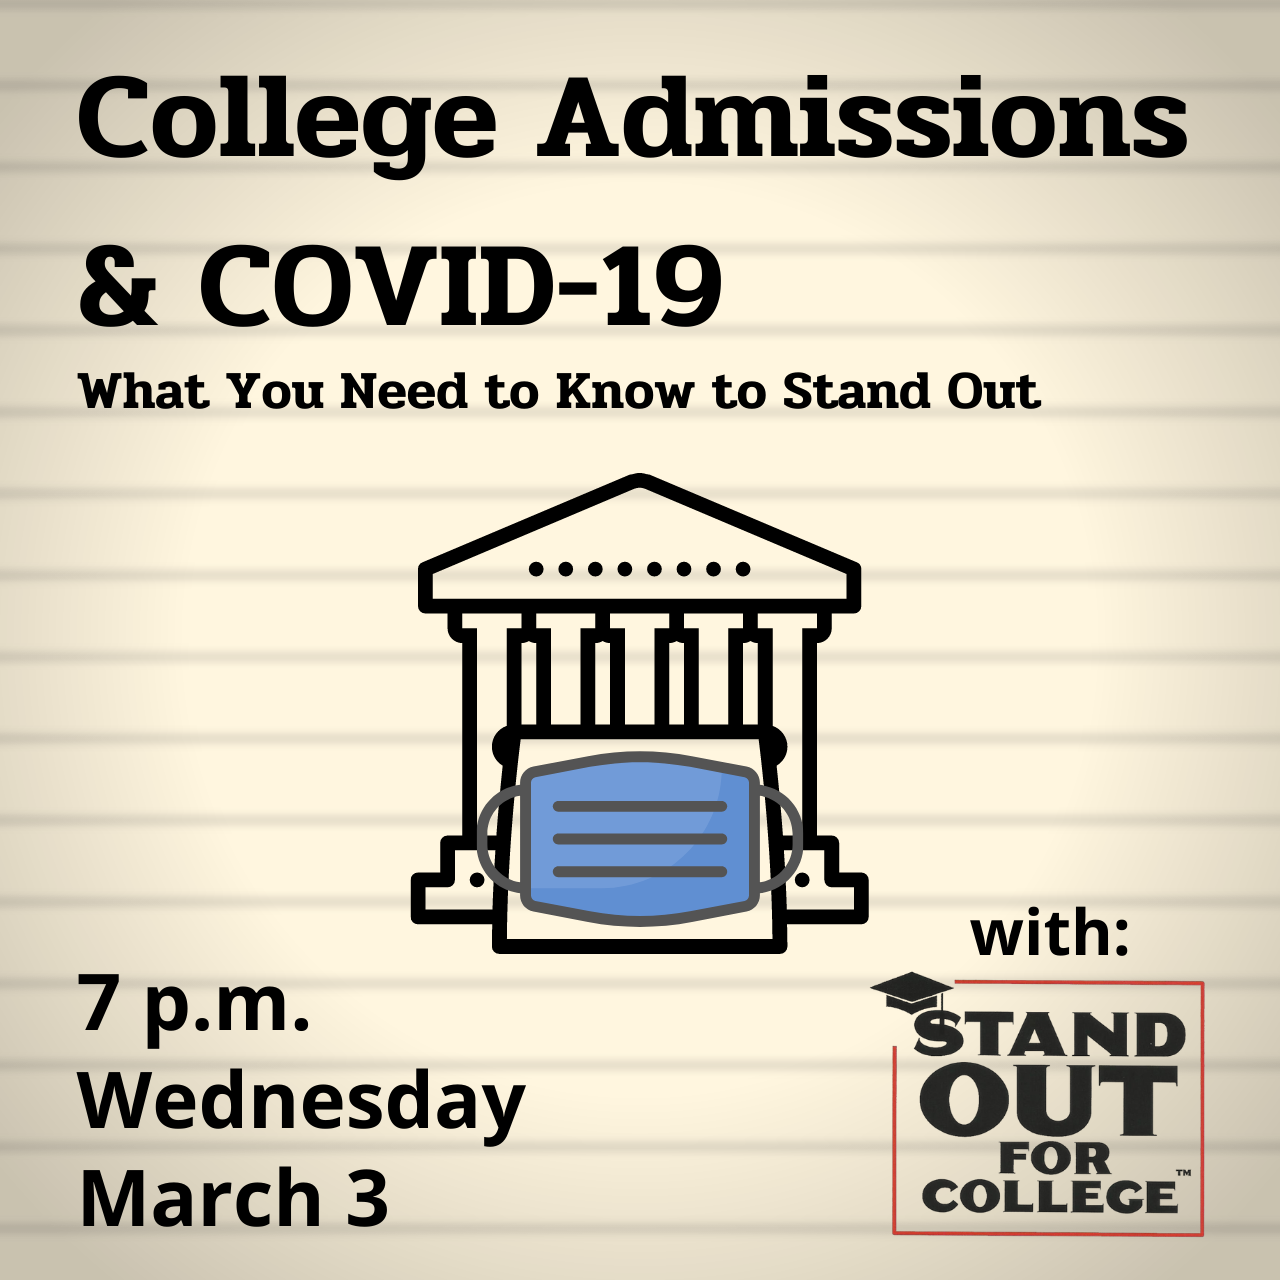 College Admissions & COVID-19: What You Need to Know to Stand Out